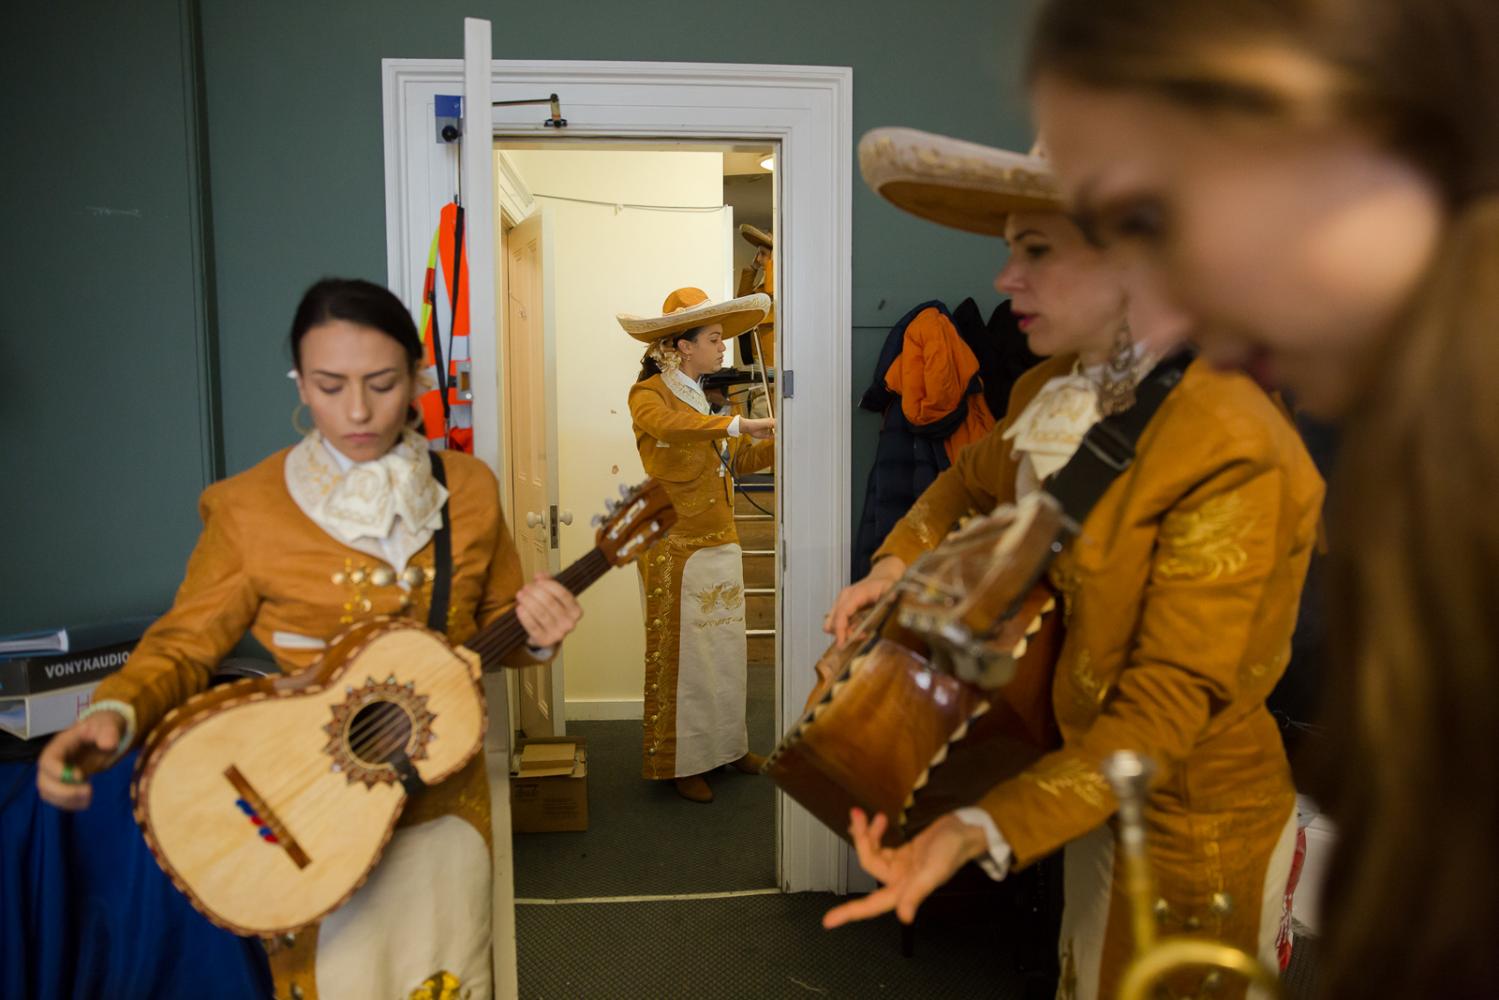 A backstage moment before a performance of Las Adelitas 